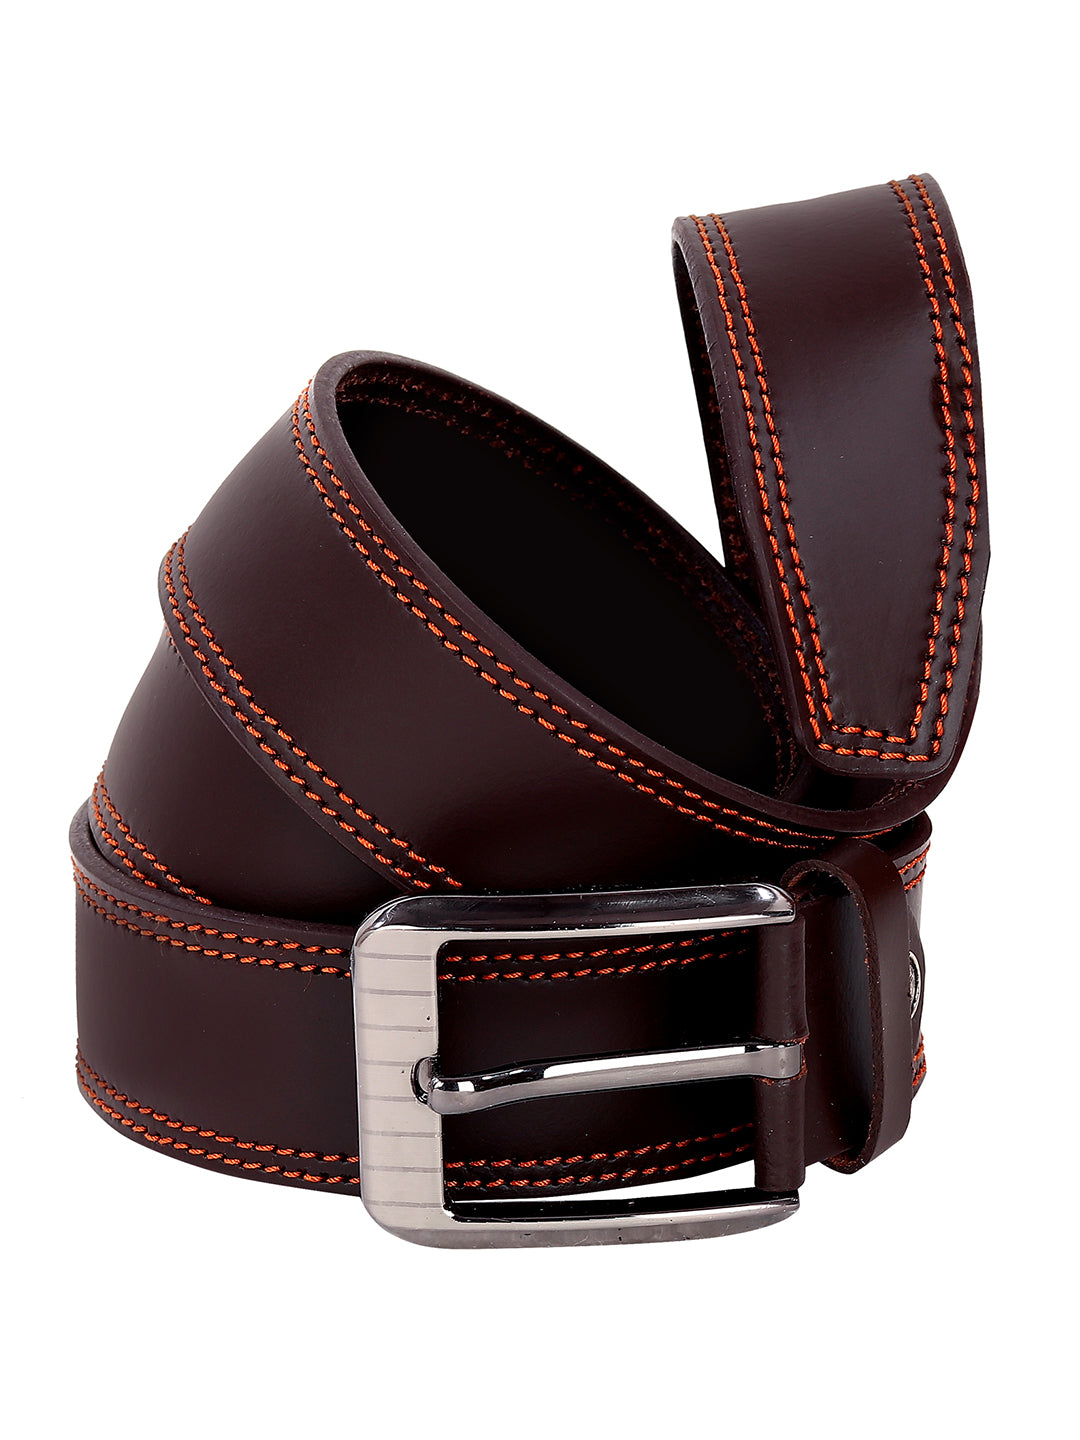 Leather World Formal Casual Brown Branded Stylish Genuine Leather Belt